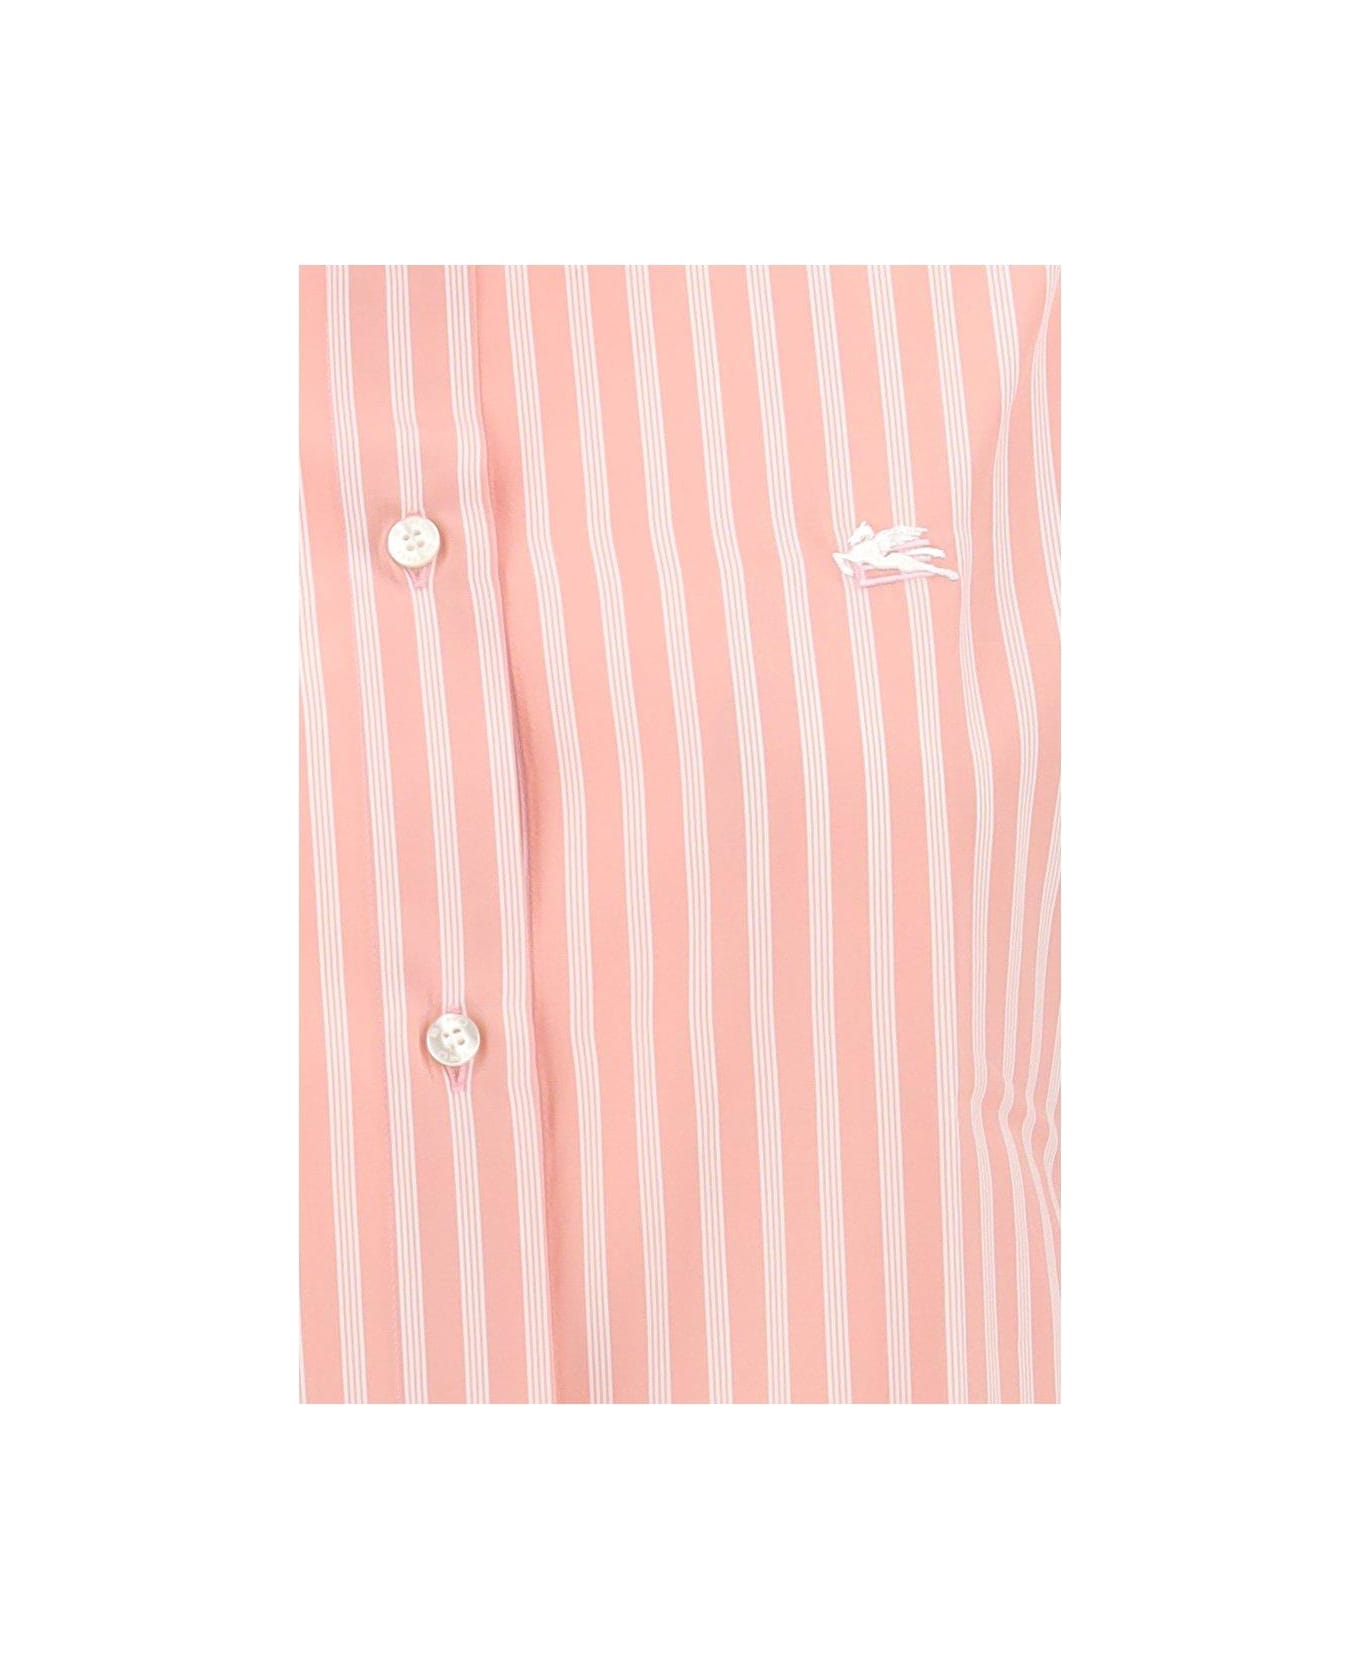 Etro Logo-embroidered Striped Buttoned Shirt Etro - PINK